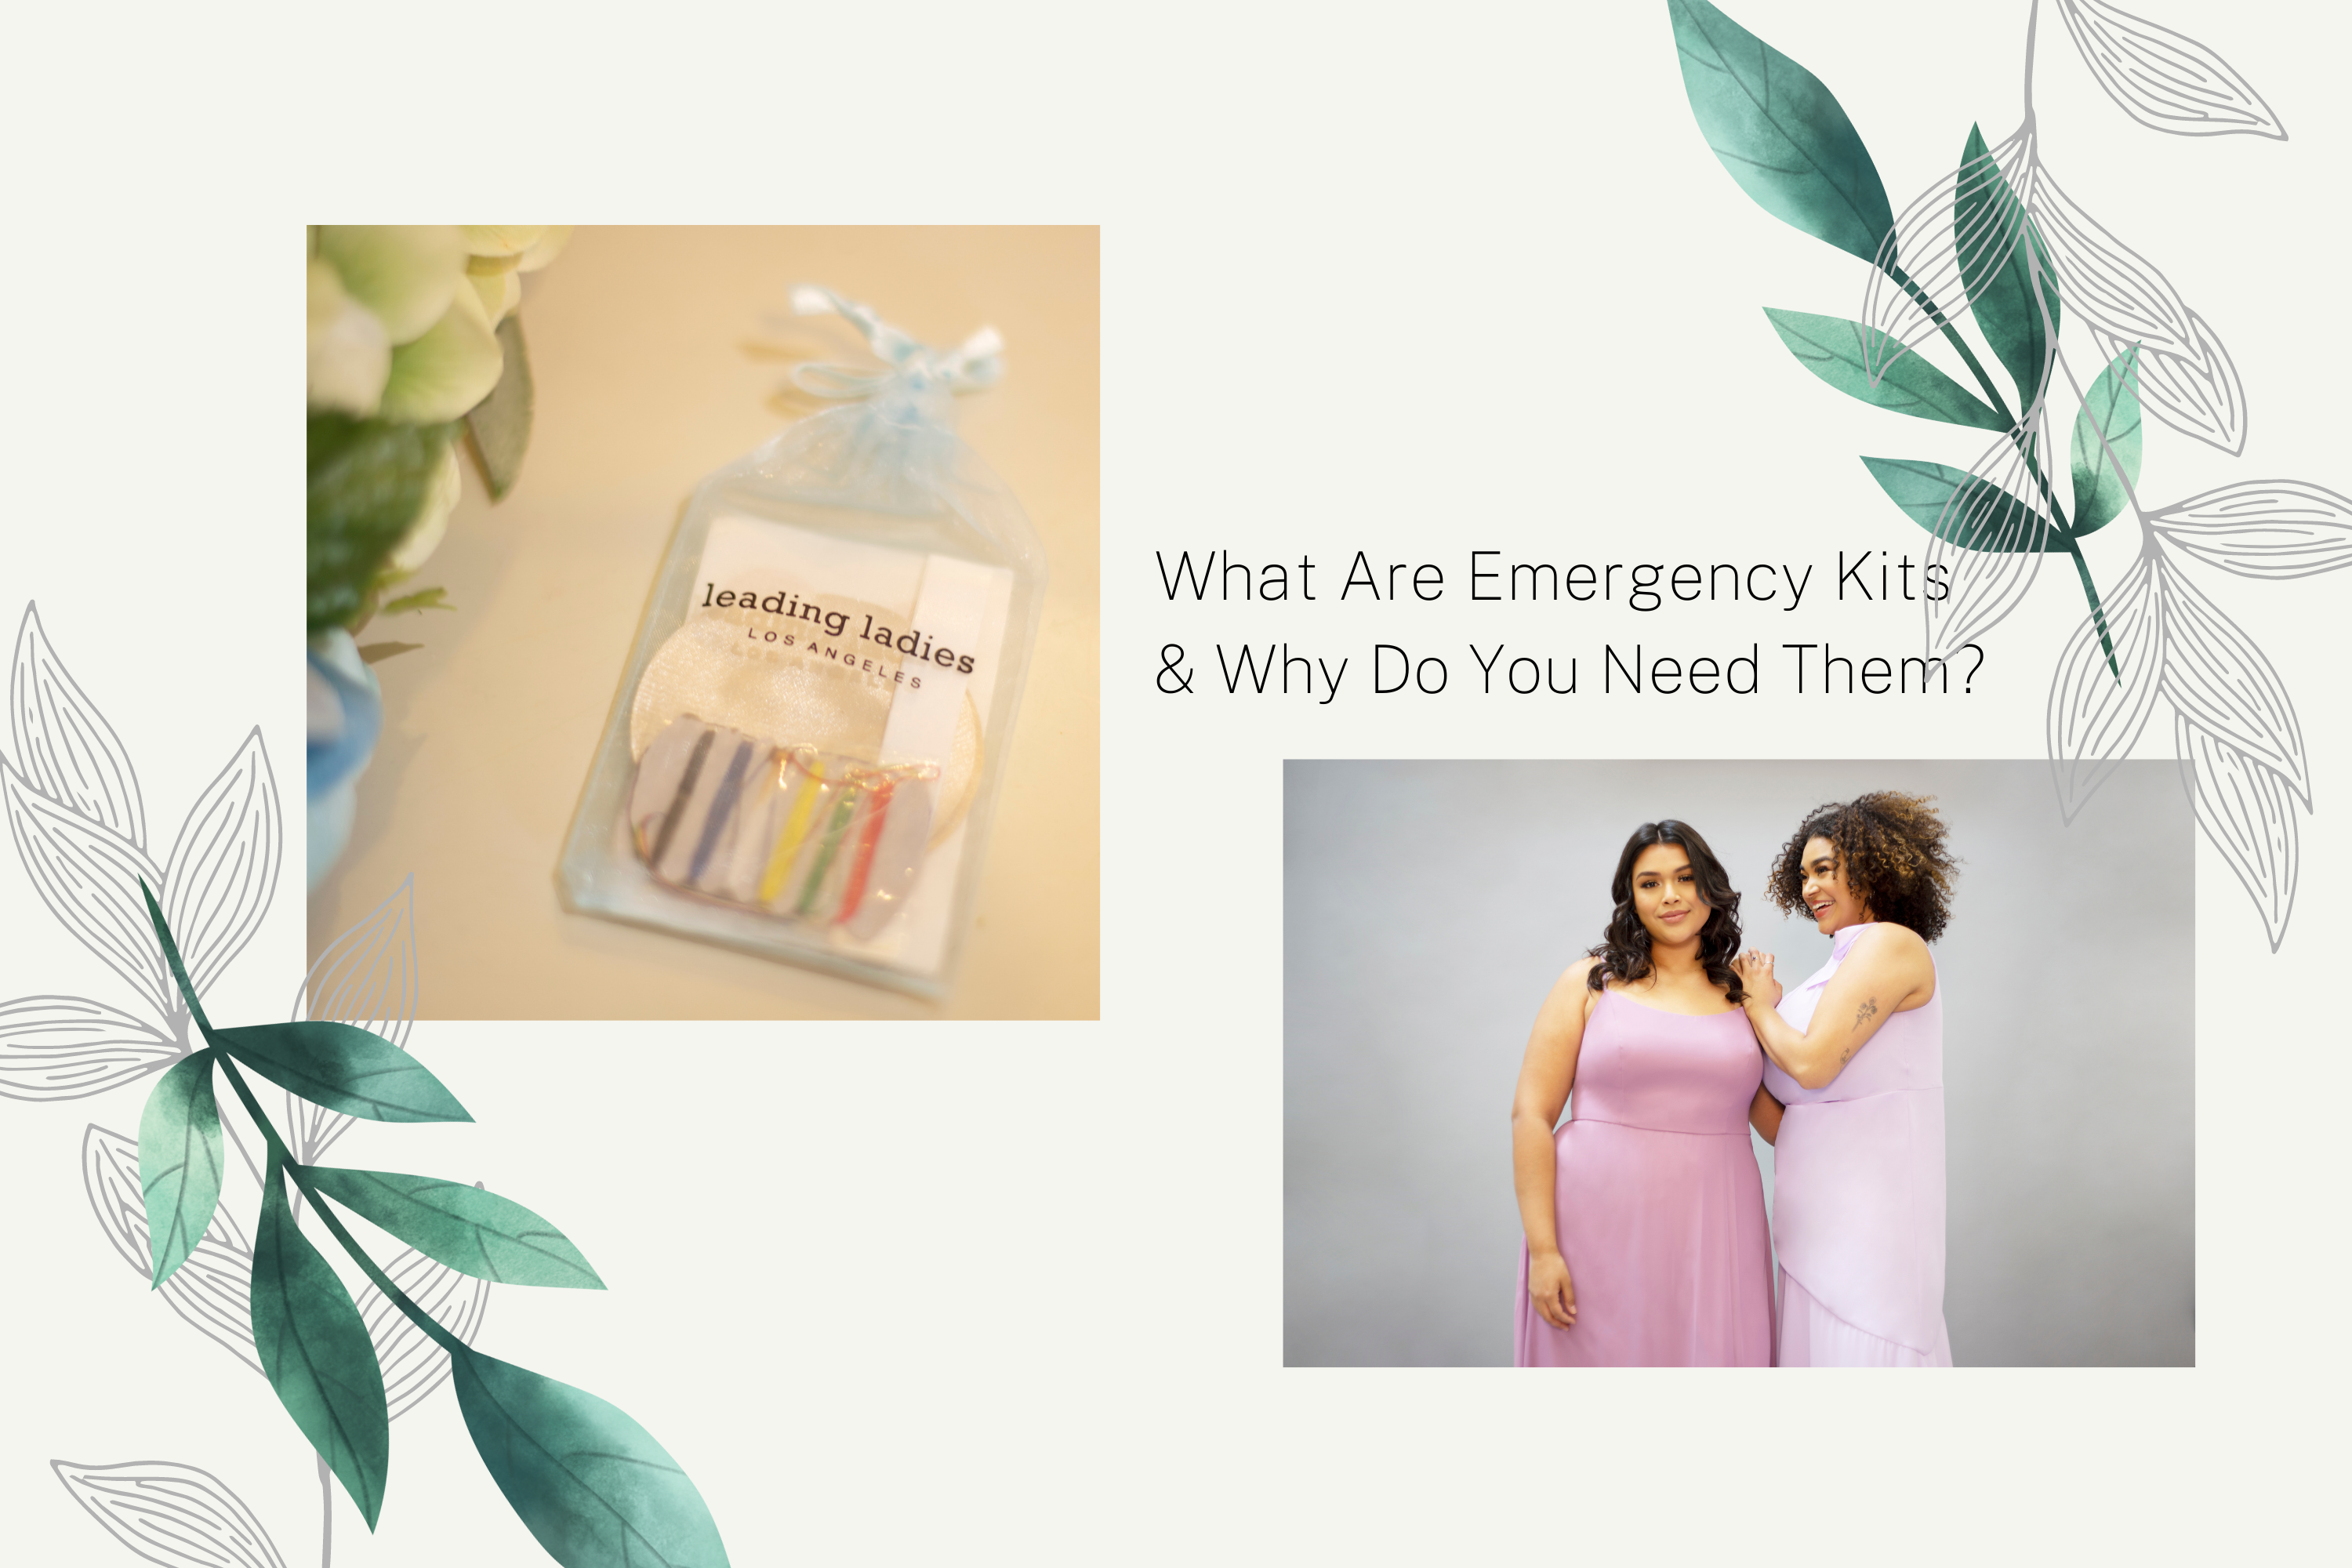 What Are Emergency Kits & Why Do You Need Them?